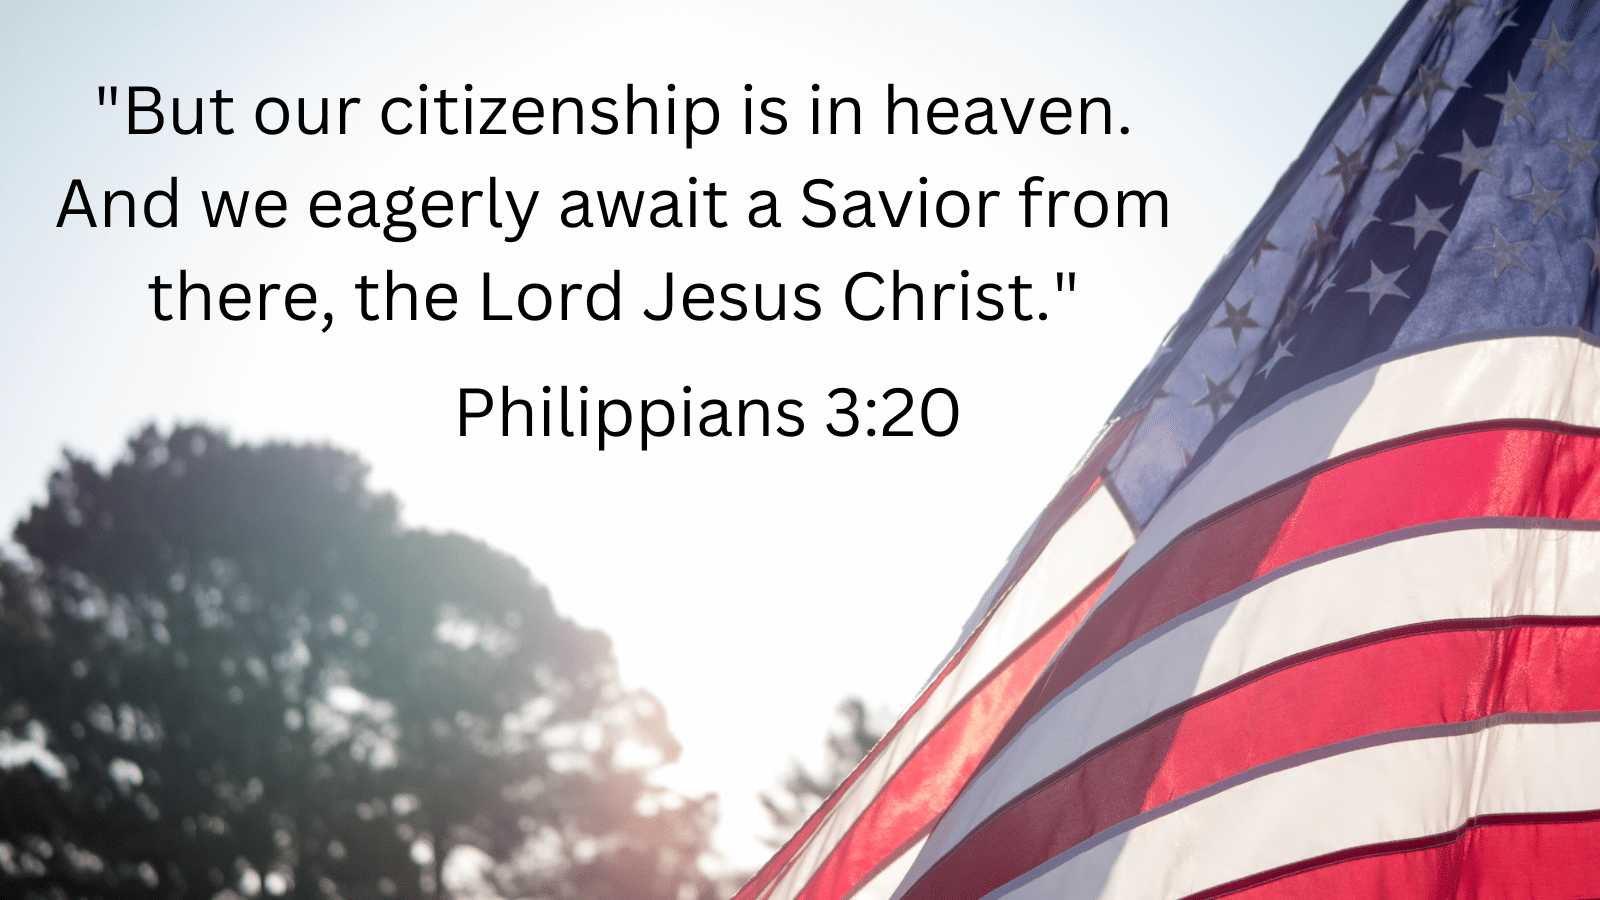 Flag waving in wind with Philippians 3:20